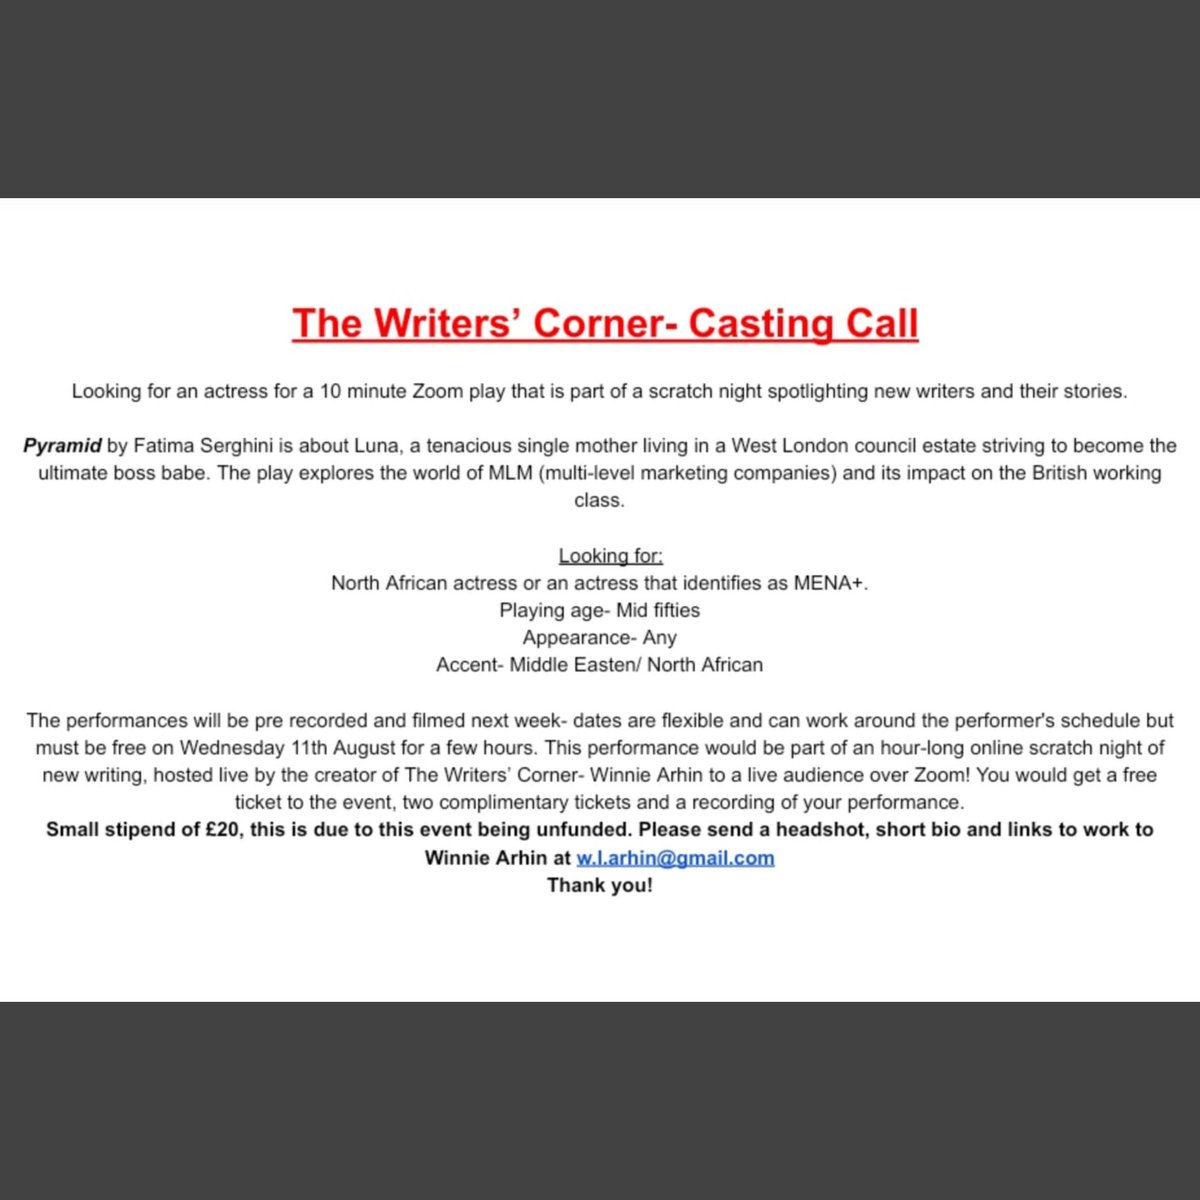 📢Casting for MENA+ actress for 10 min Zoom play for The Writers’ Corner #online #scratchnight created by @WinnieArhin. 

 @mena_arts_uk  @MigrantsTheatre @BorderCrossings @NoorTheatre @meiartsculture @MuslimCasting @shubbakfestival @WeAre4nAffairs @Diverse_Casting @DiverseSchool